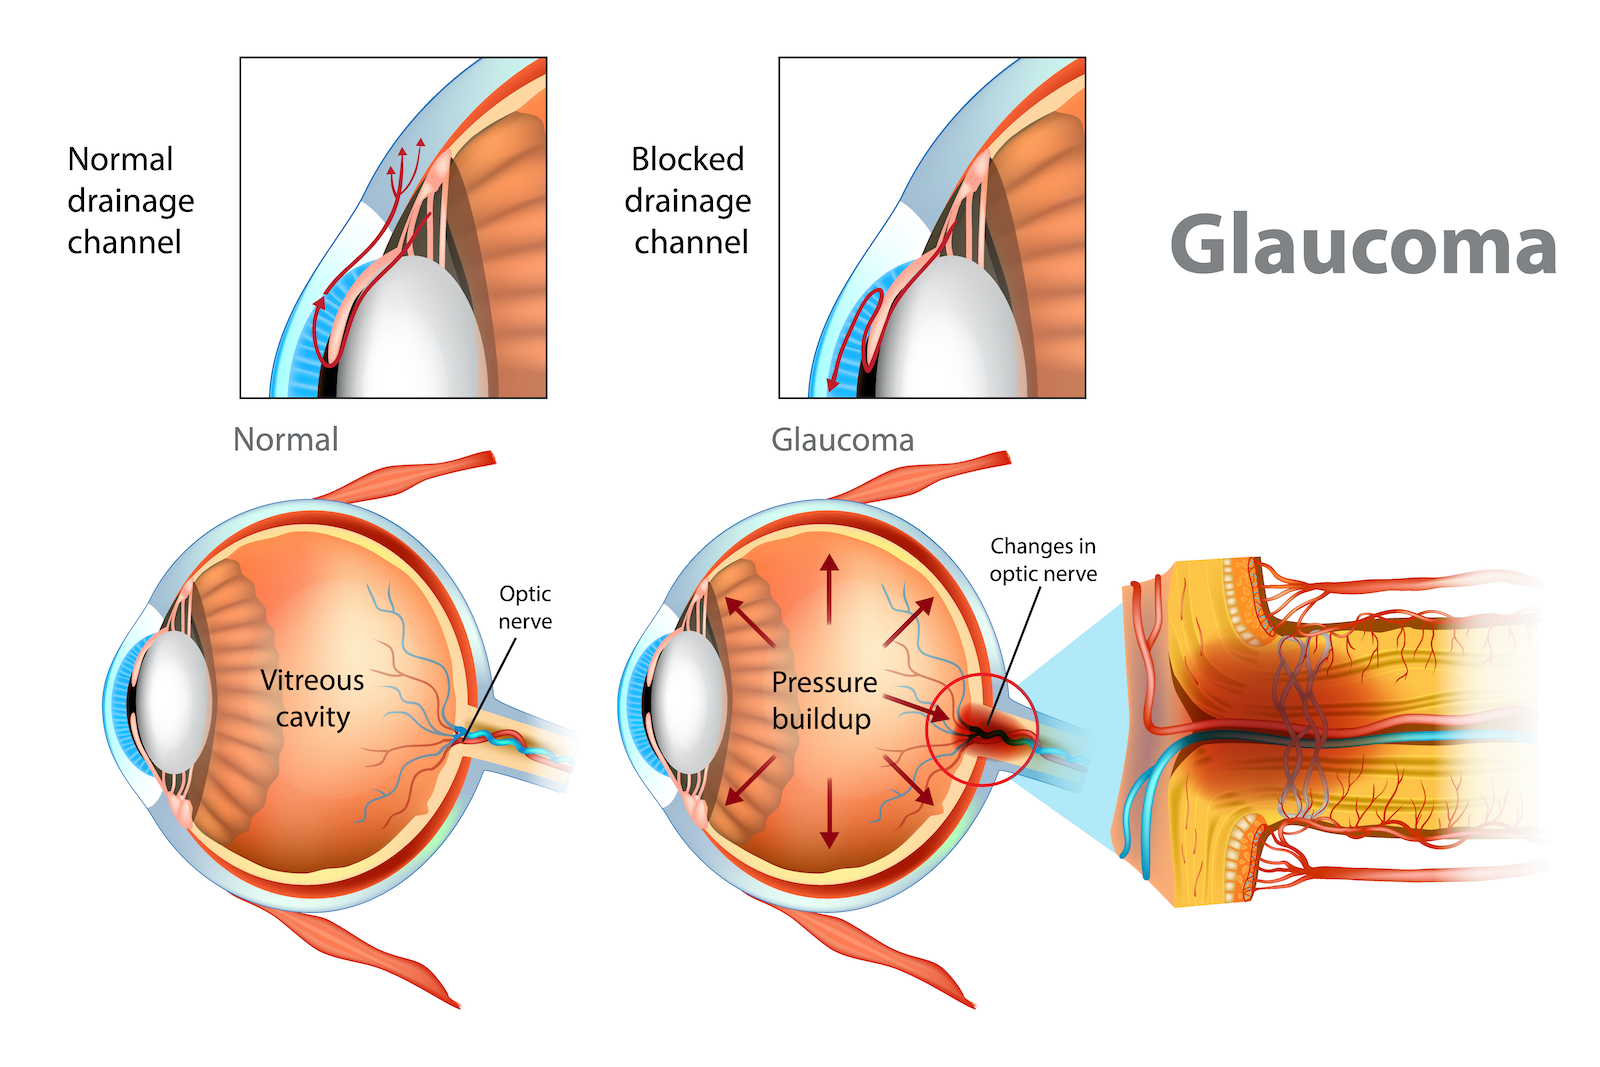 Glaucoma. Illustration showing open-angle glaucoma. Intraocular pressure in the back of the eye